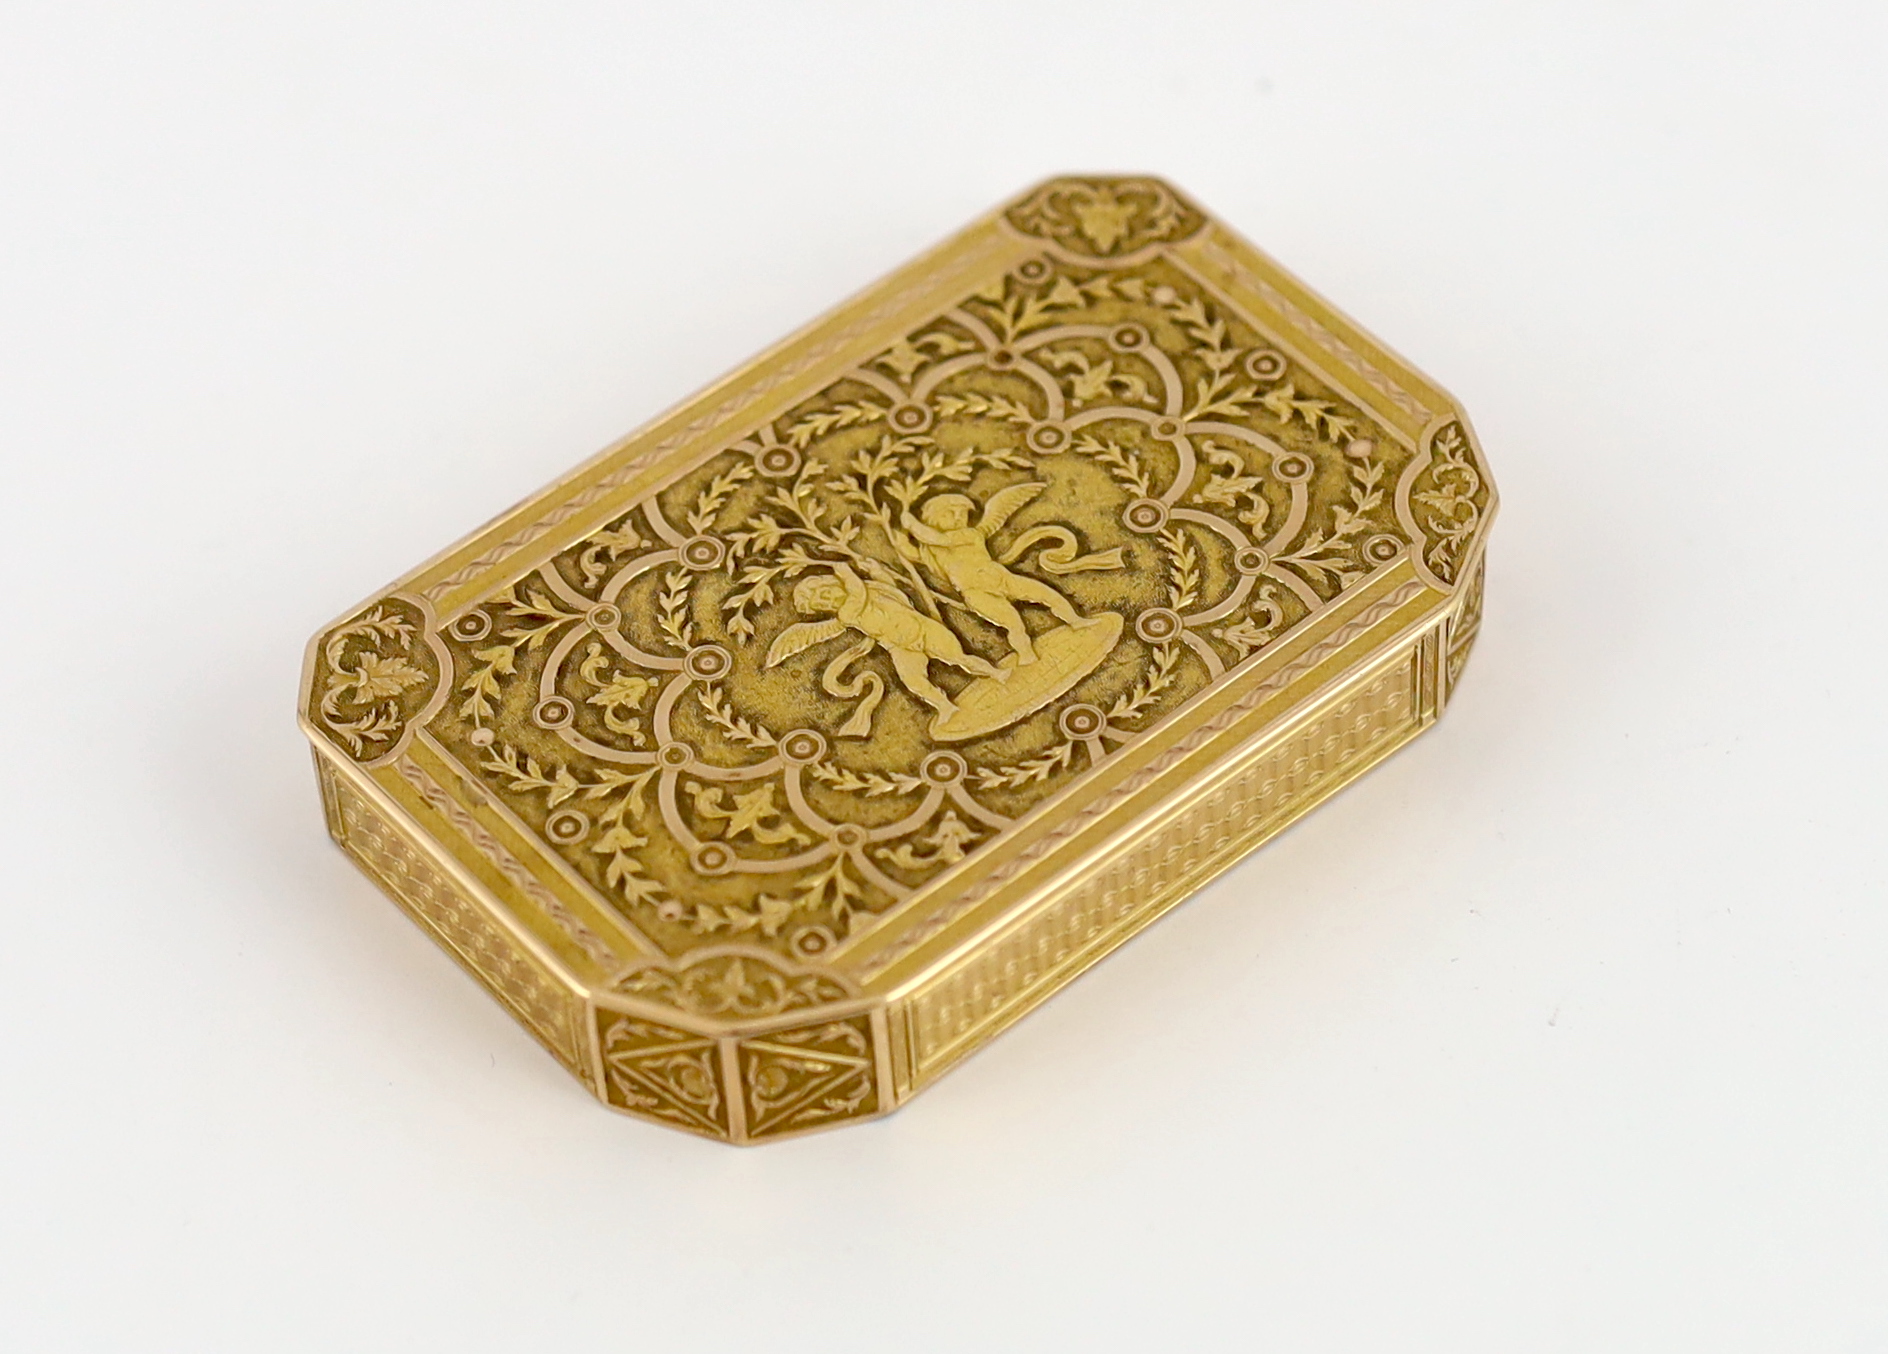 A 19th century Swiss engraved gold table snuff box